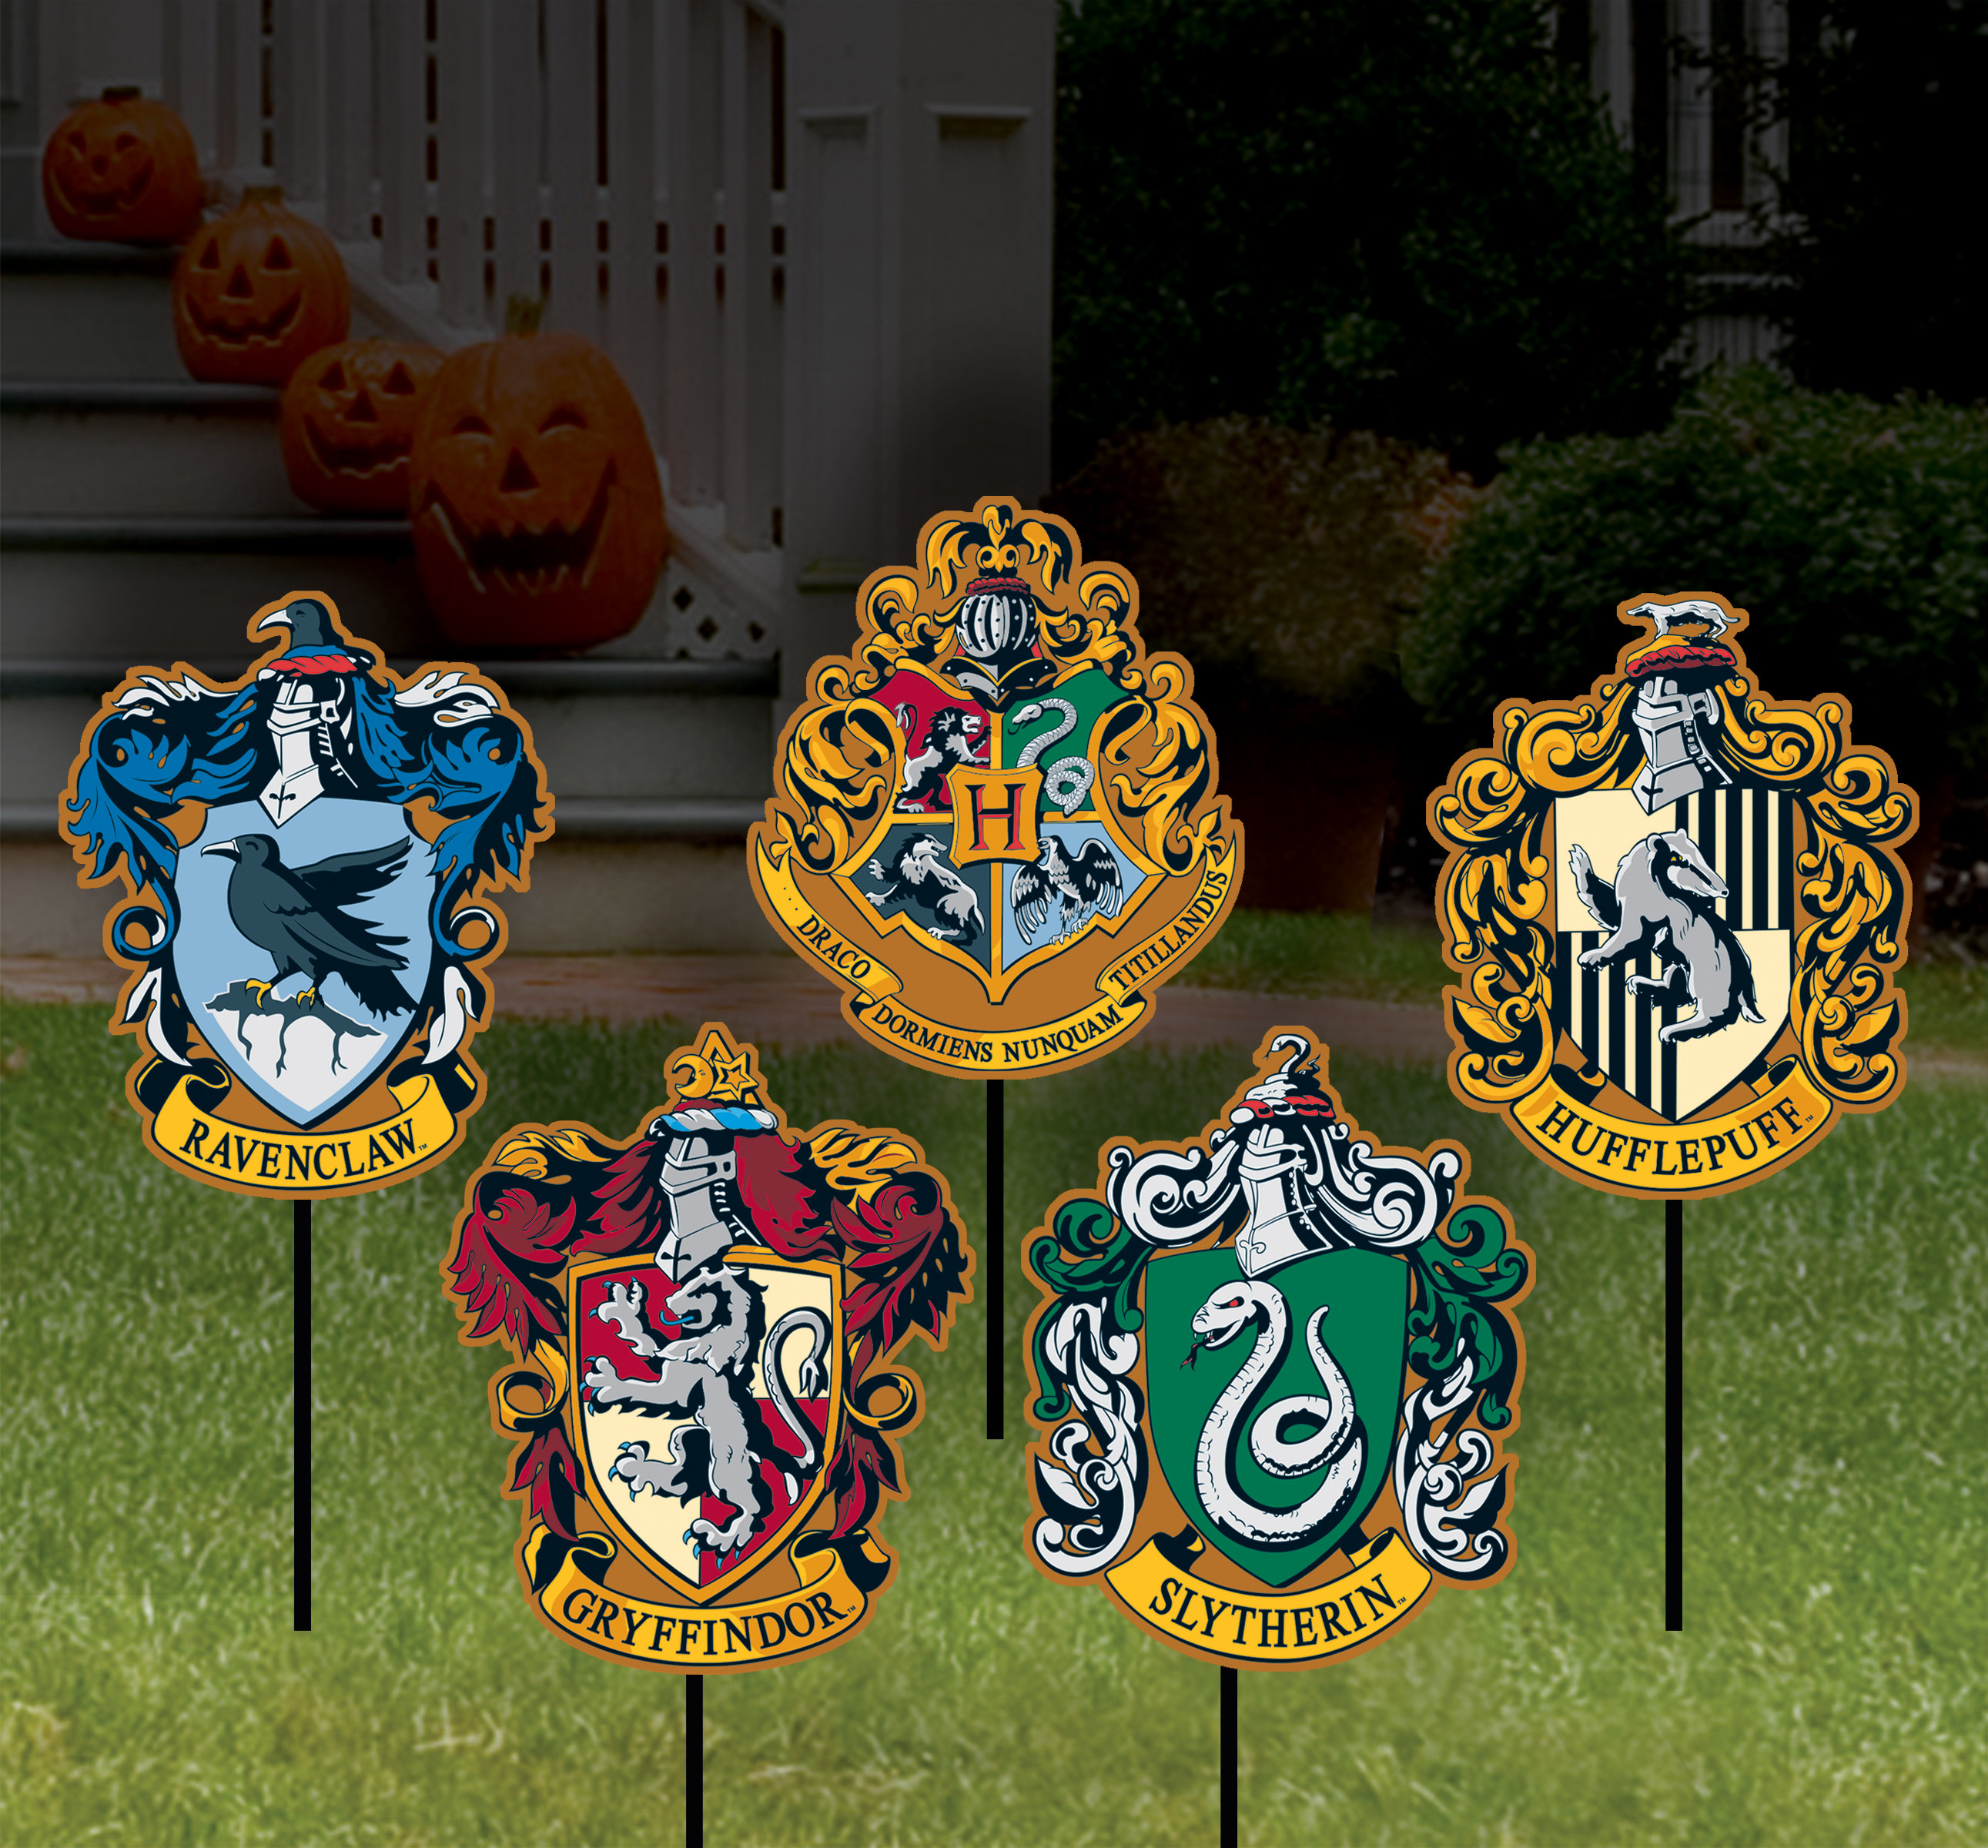 How Relevant Are the Hufflepuff and Ravenclaw Houses in Harry Potter?